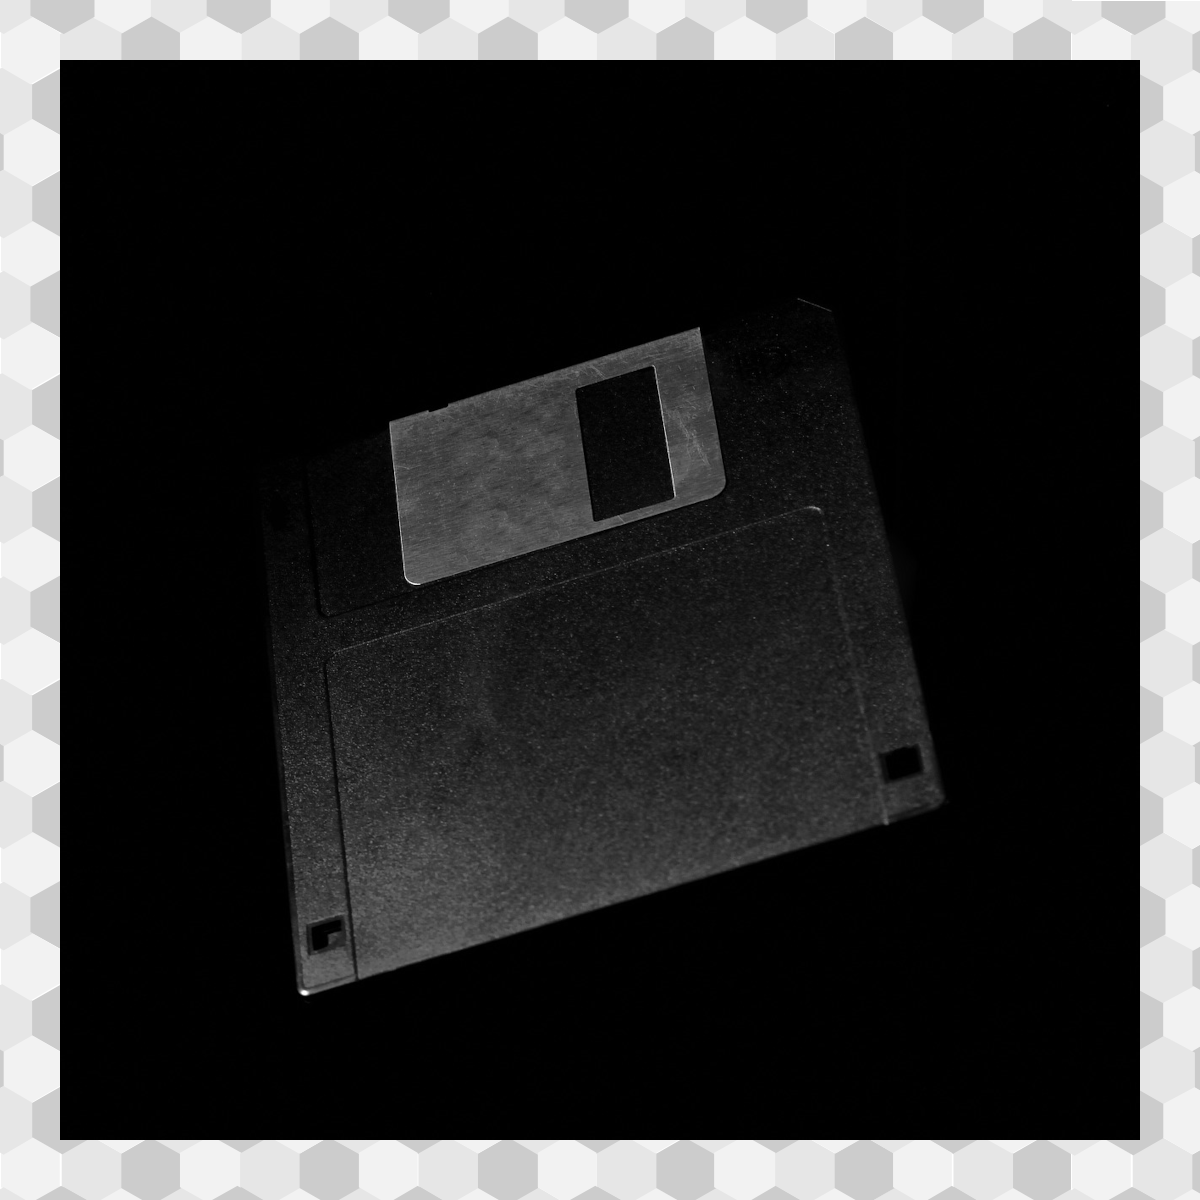 image of a black 3.5" floppy disk with a black background and hexagon border